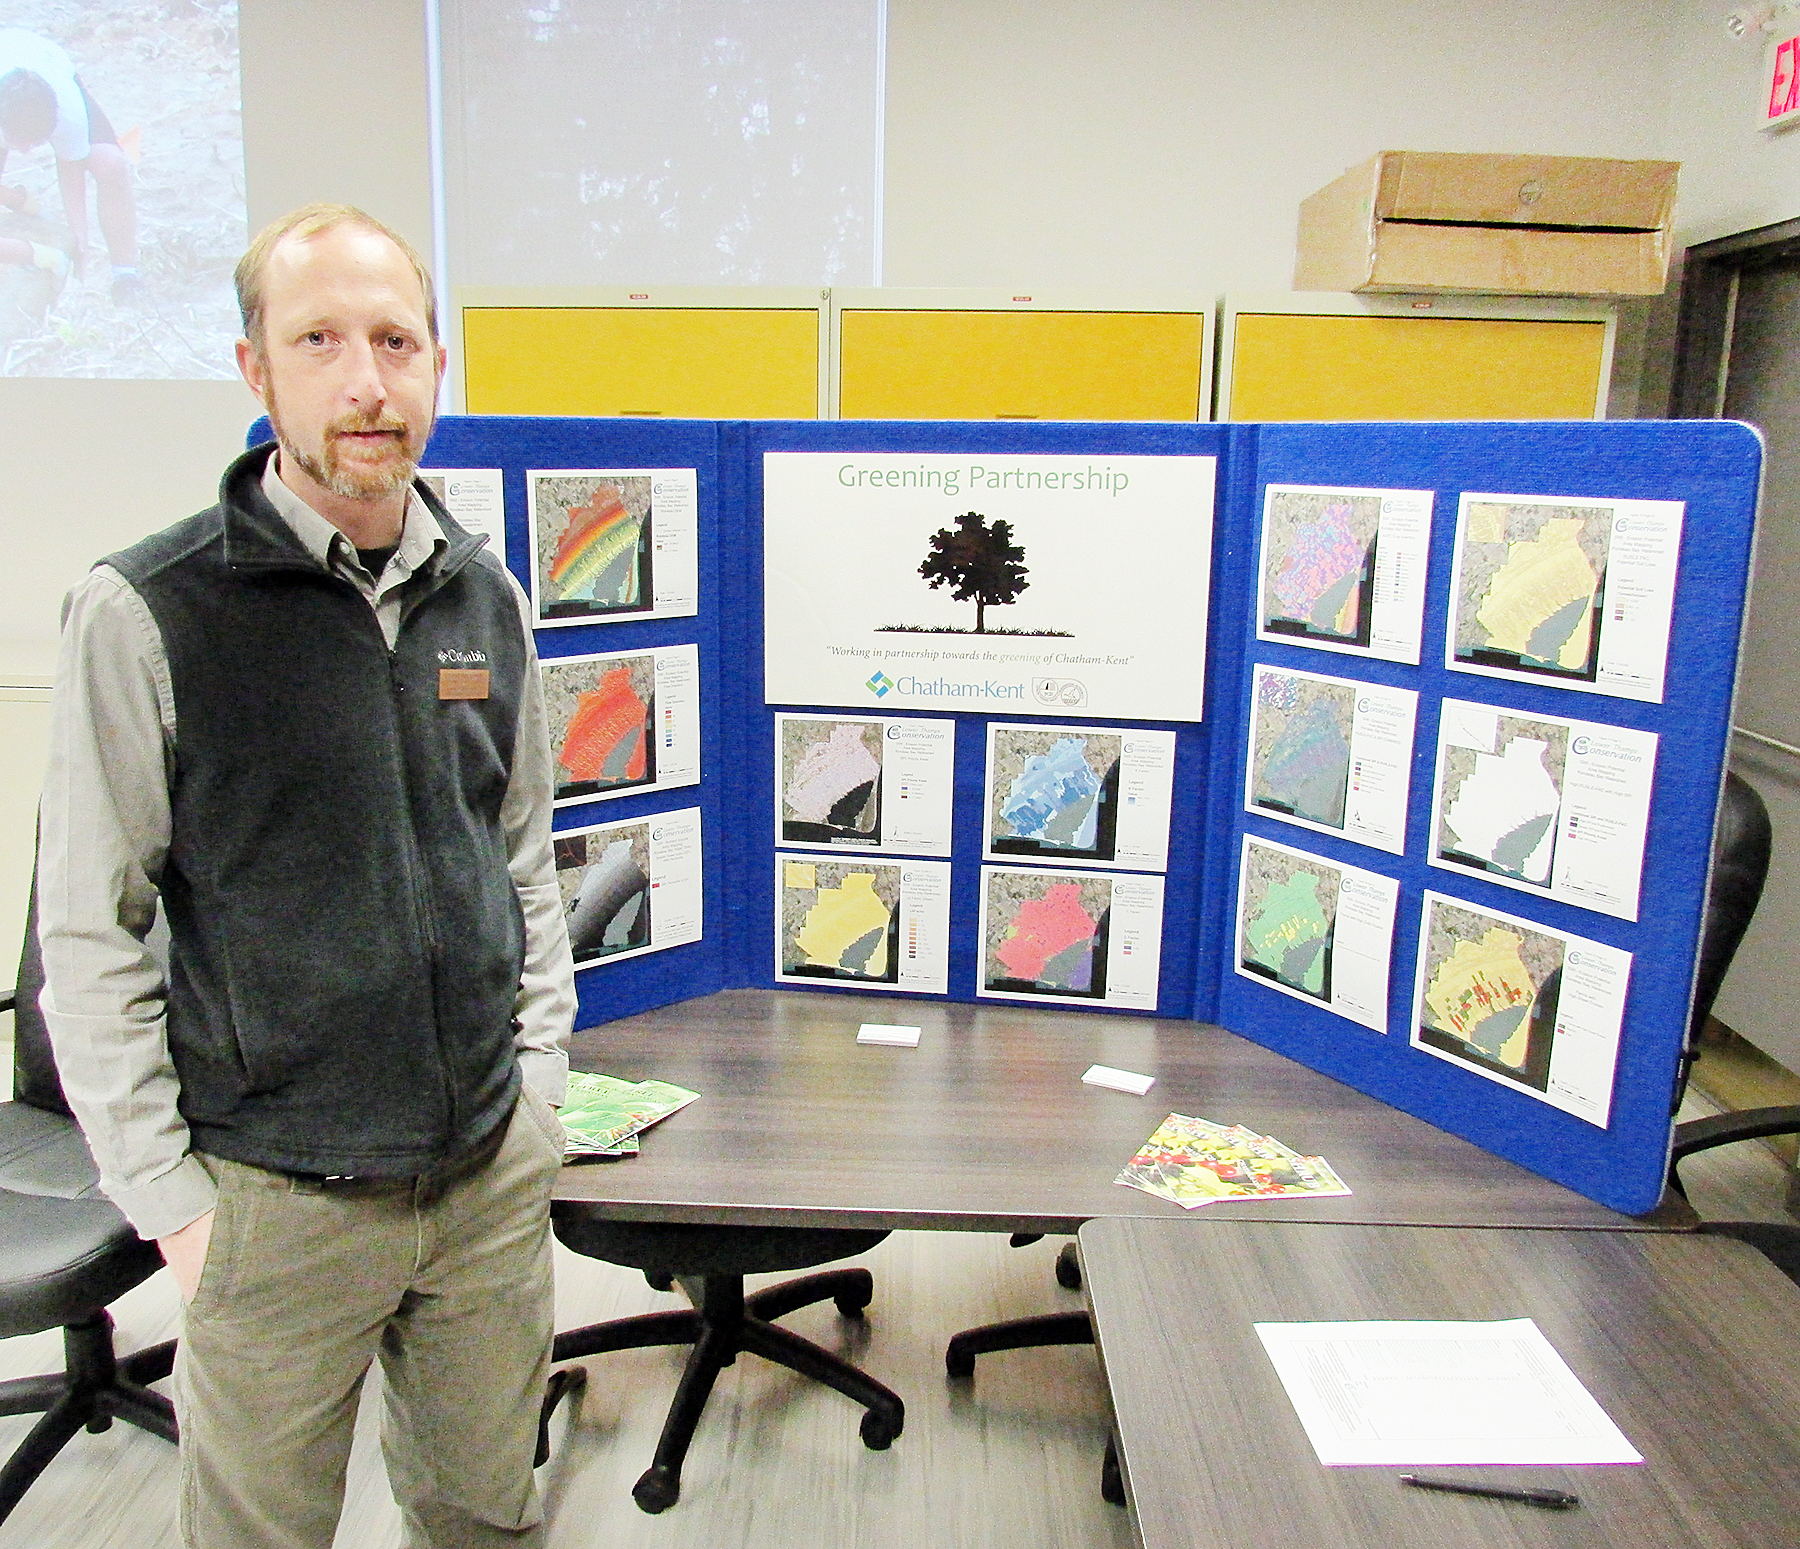 Greg Van Every of the Lower Thames Valley Conservation Authority stands next to a display showcasing the work of the Green Partnership program, a joint effort with the municipality of Chatham-Kent.